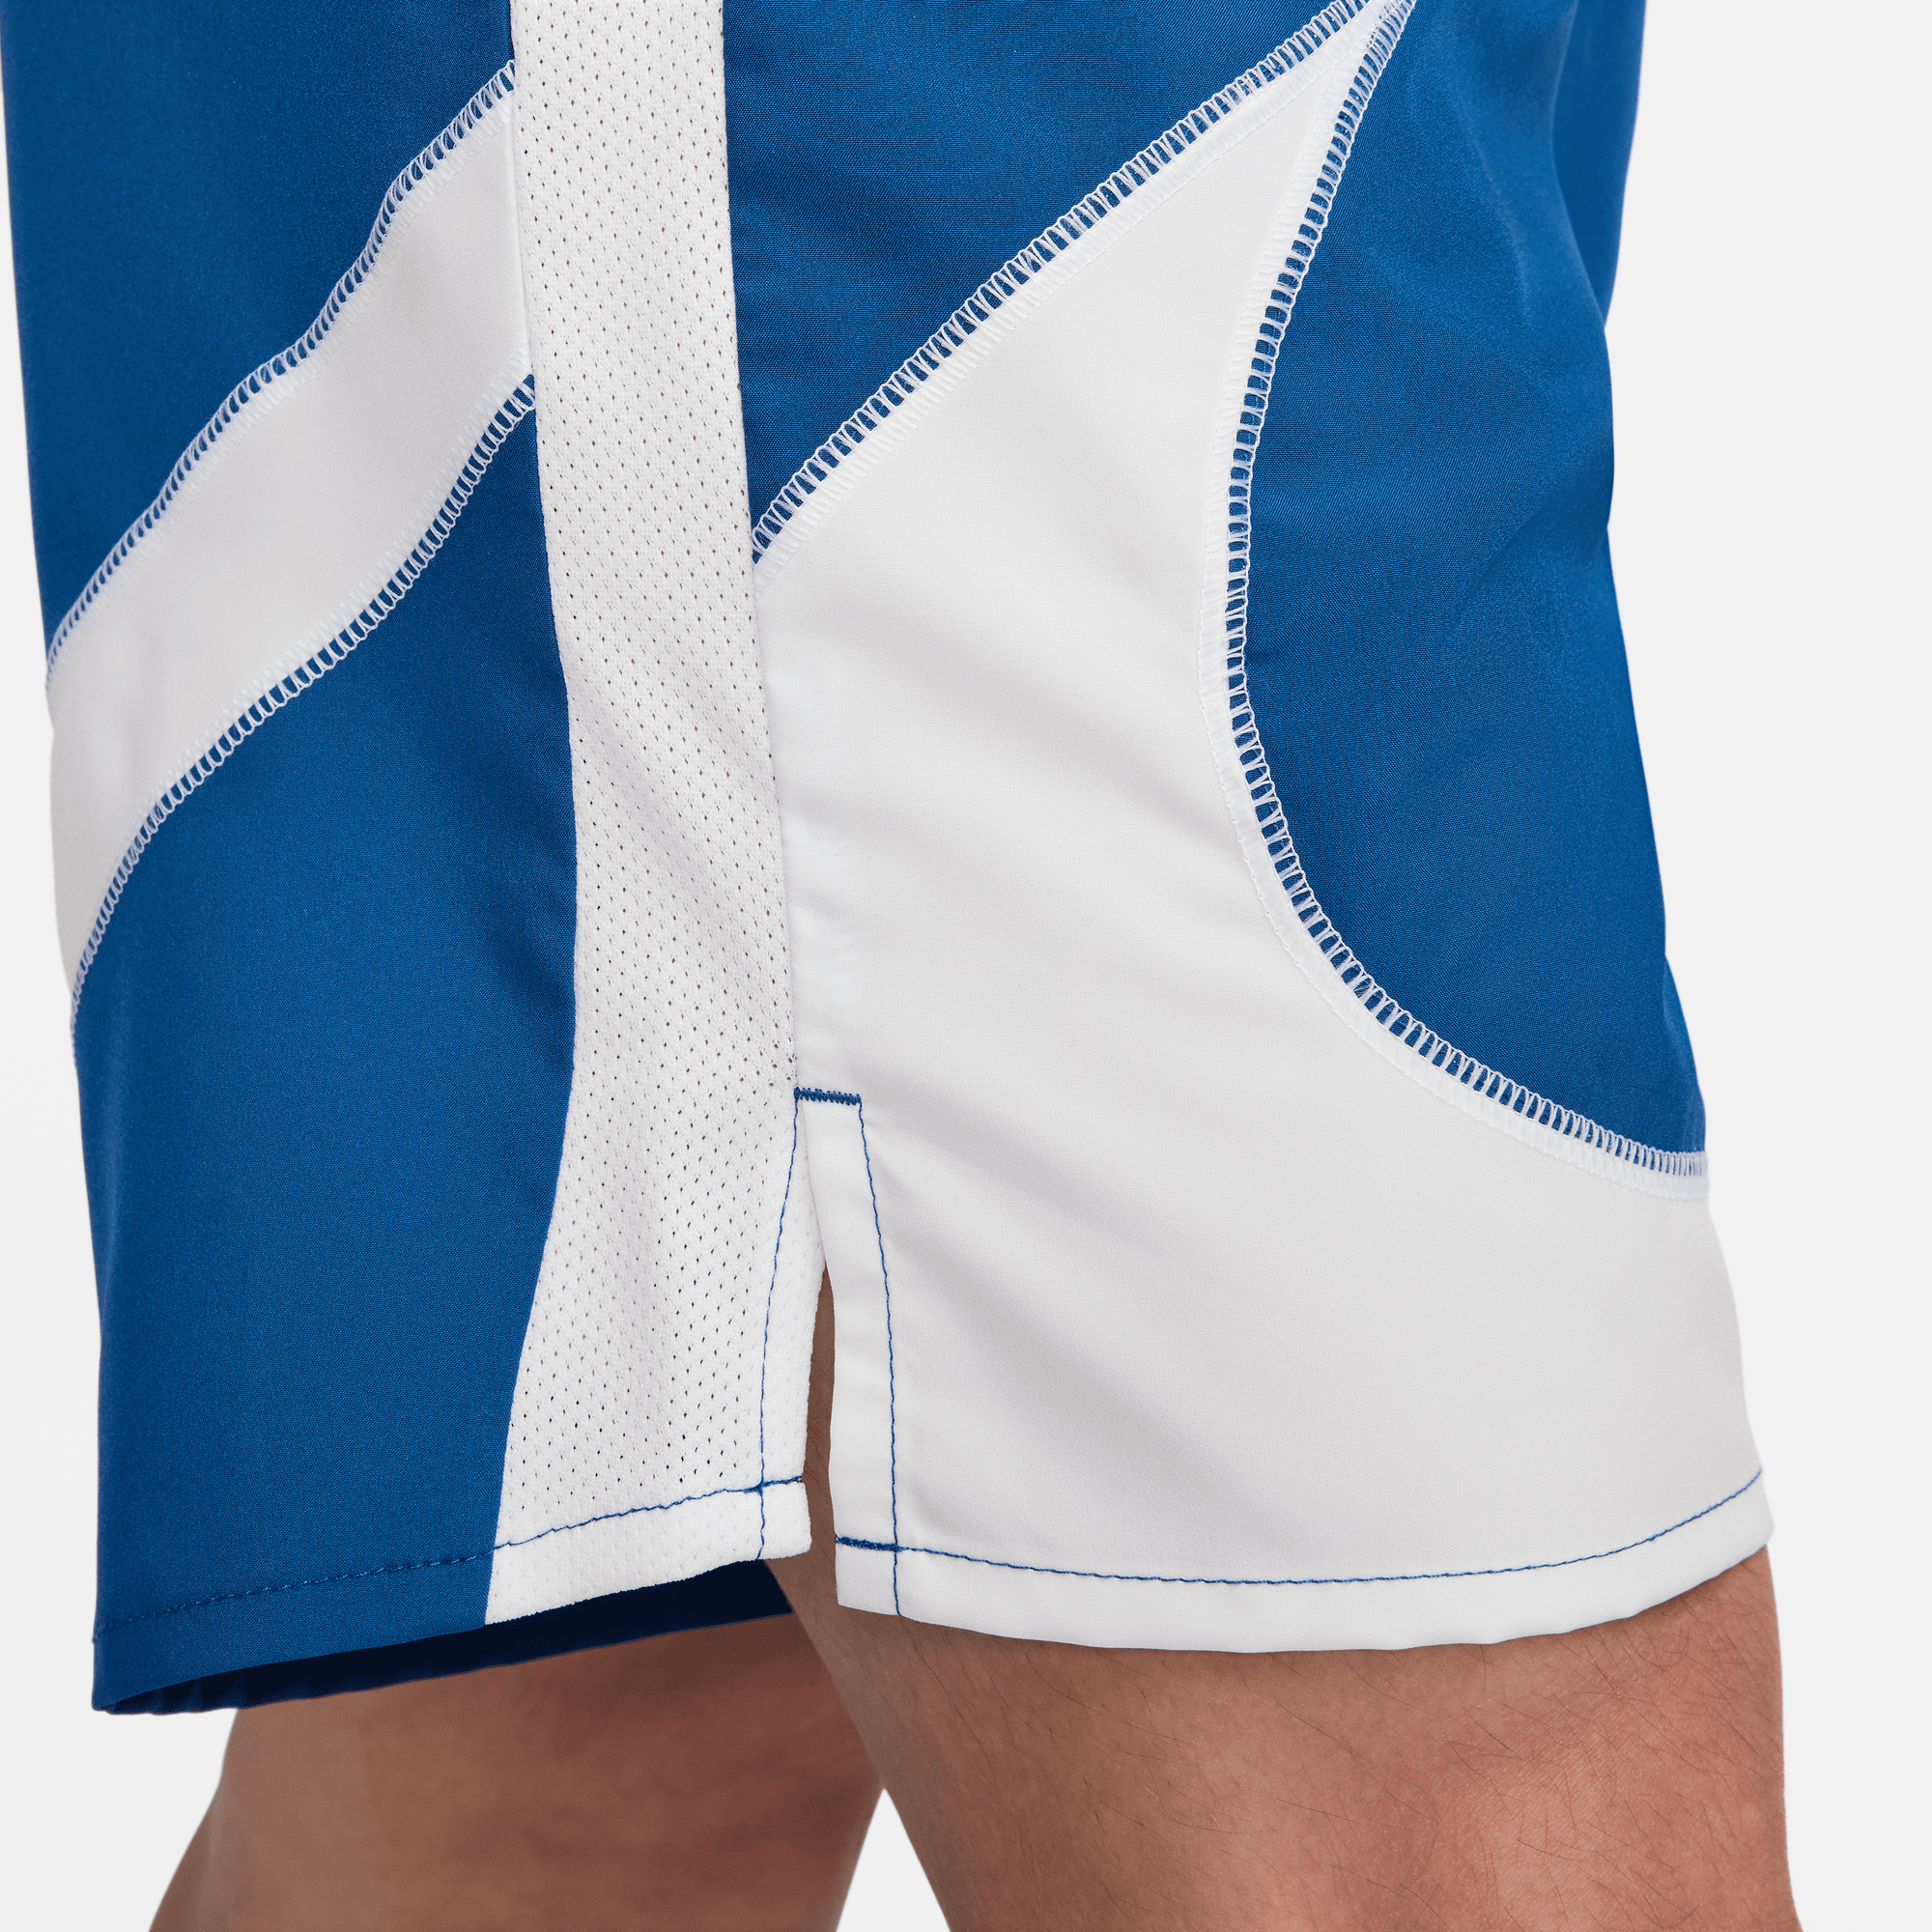 Nike Dri-FIT Challenger Unlined Athletic Shorts